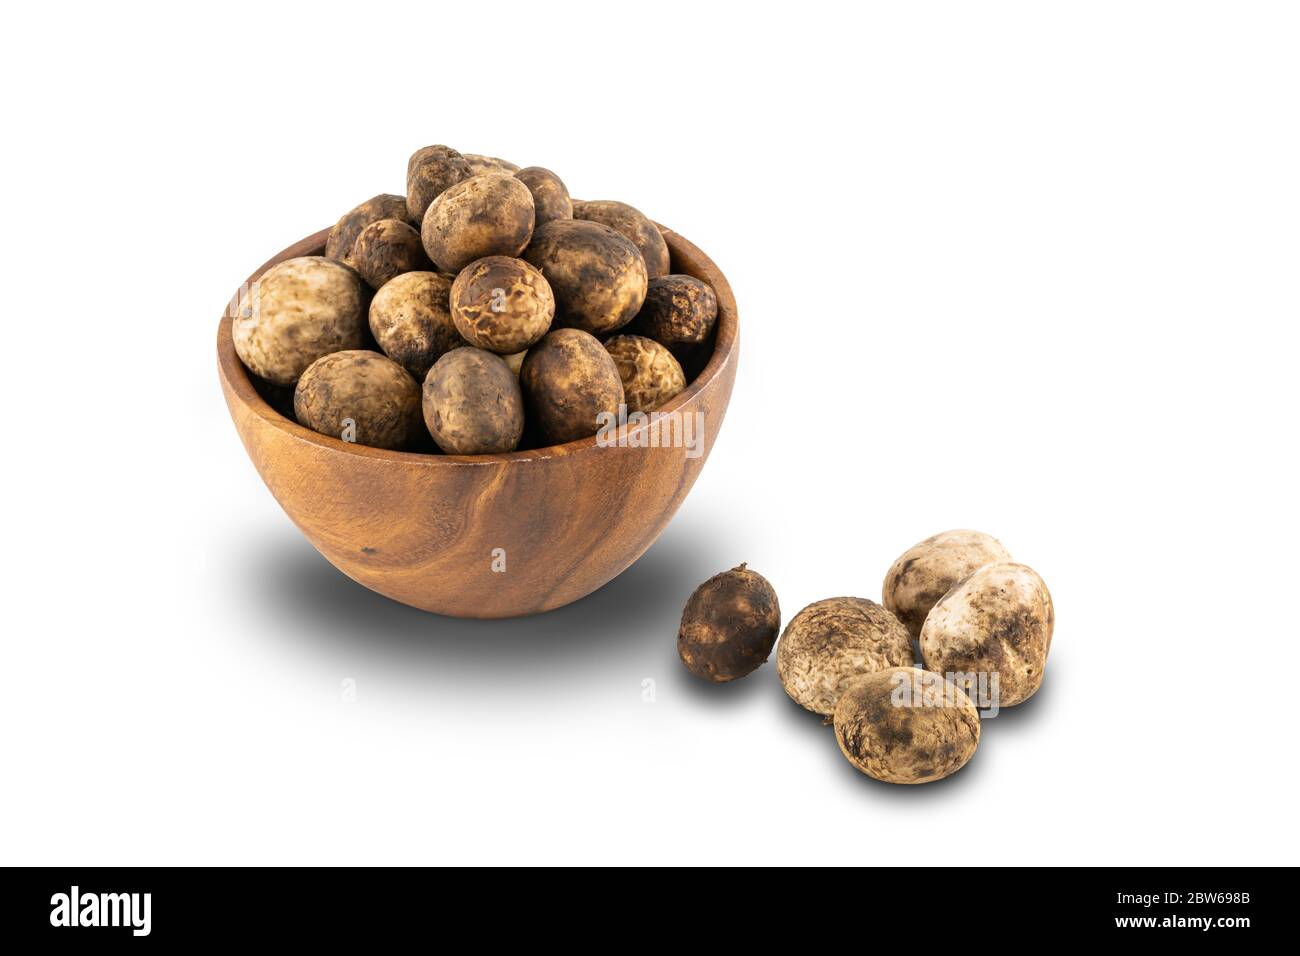 Mushroom Hygroscopic earthstar or False earthstar or Barometer earthstar in a wooden bowl on white background with clipping path. Stock Photo